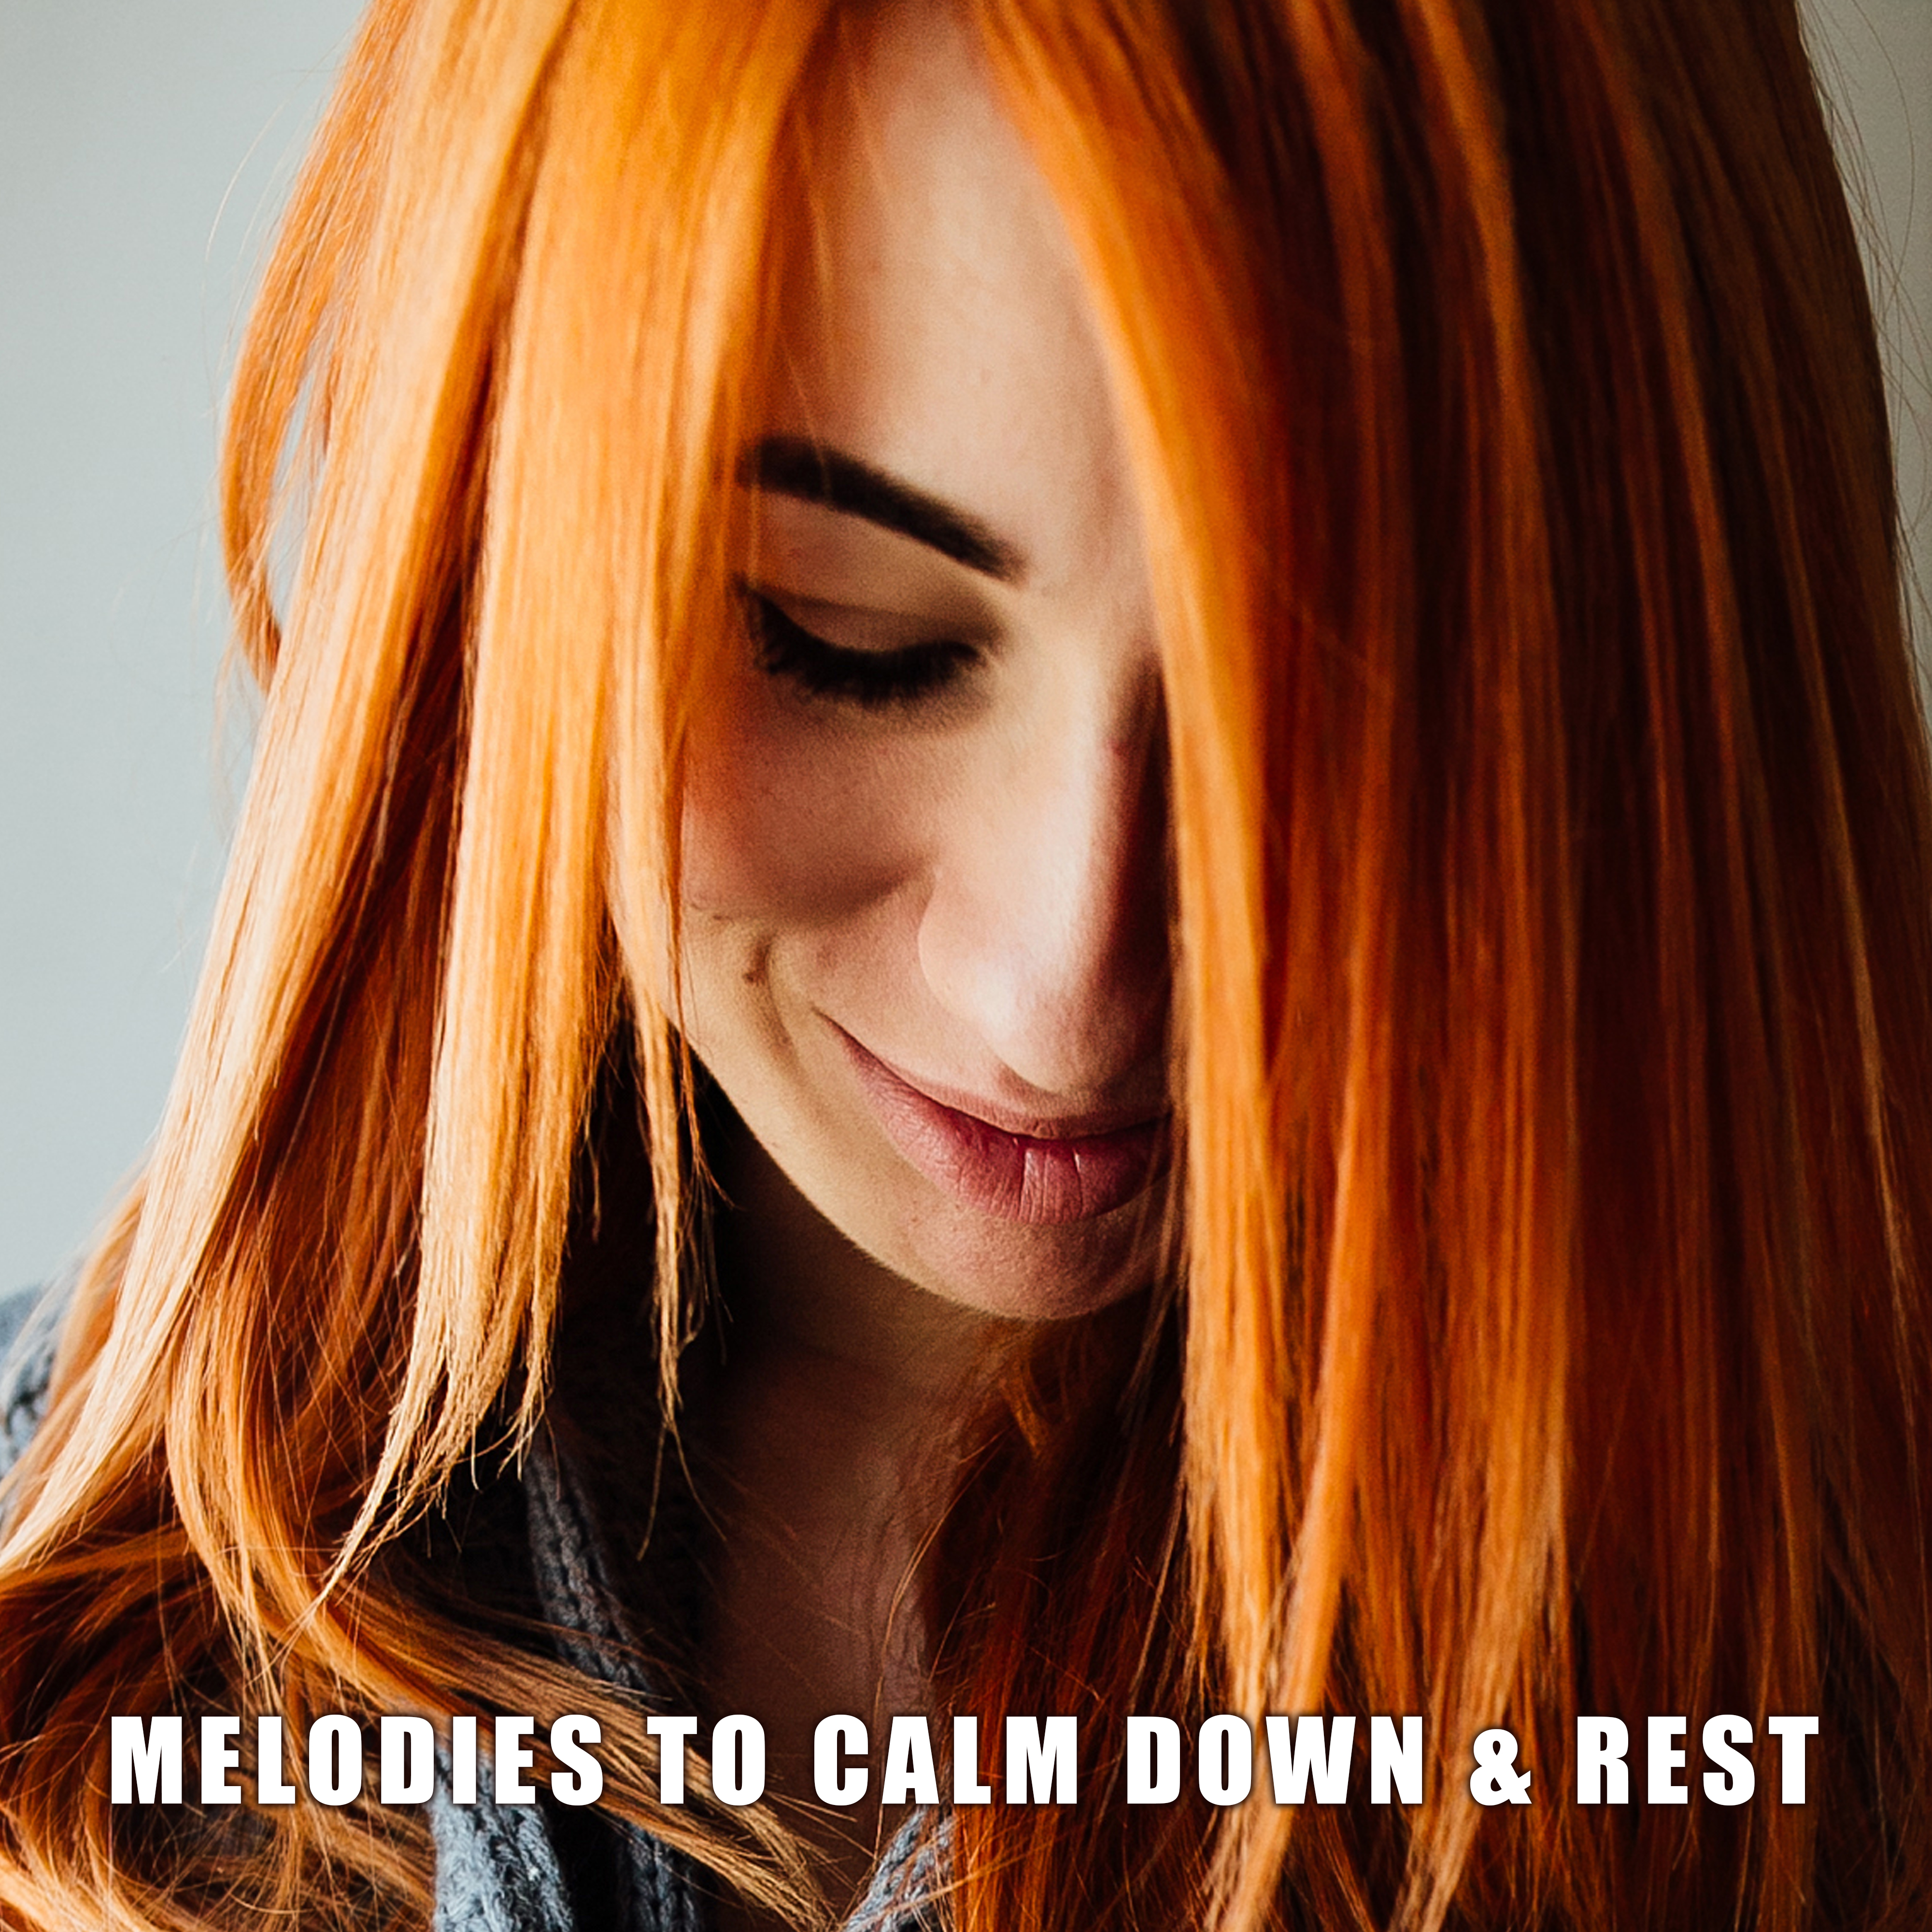 Melodies to Calm Down & Rest